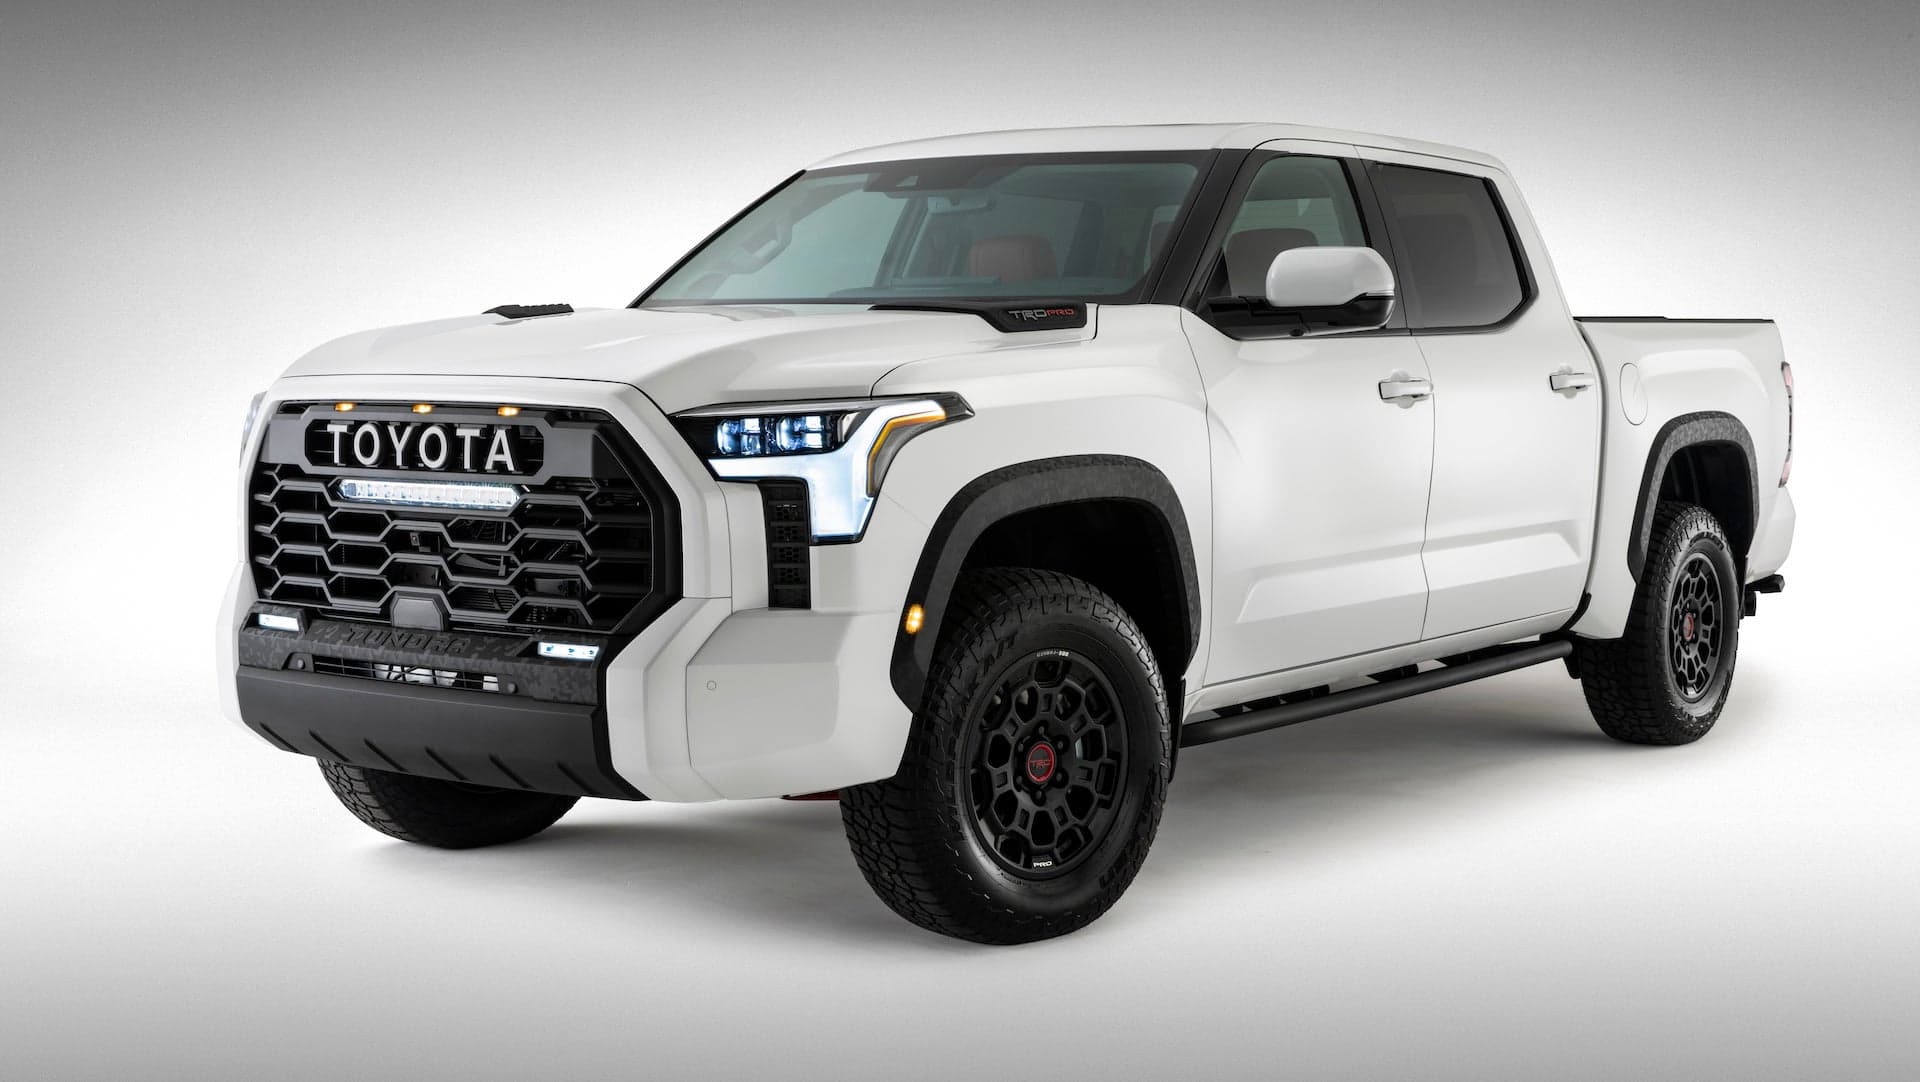 2022 Toyota Tundra: We’ll Finally See It Sept. 19